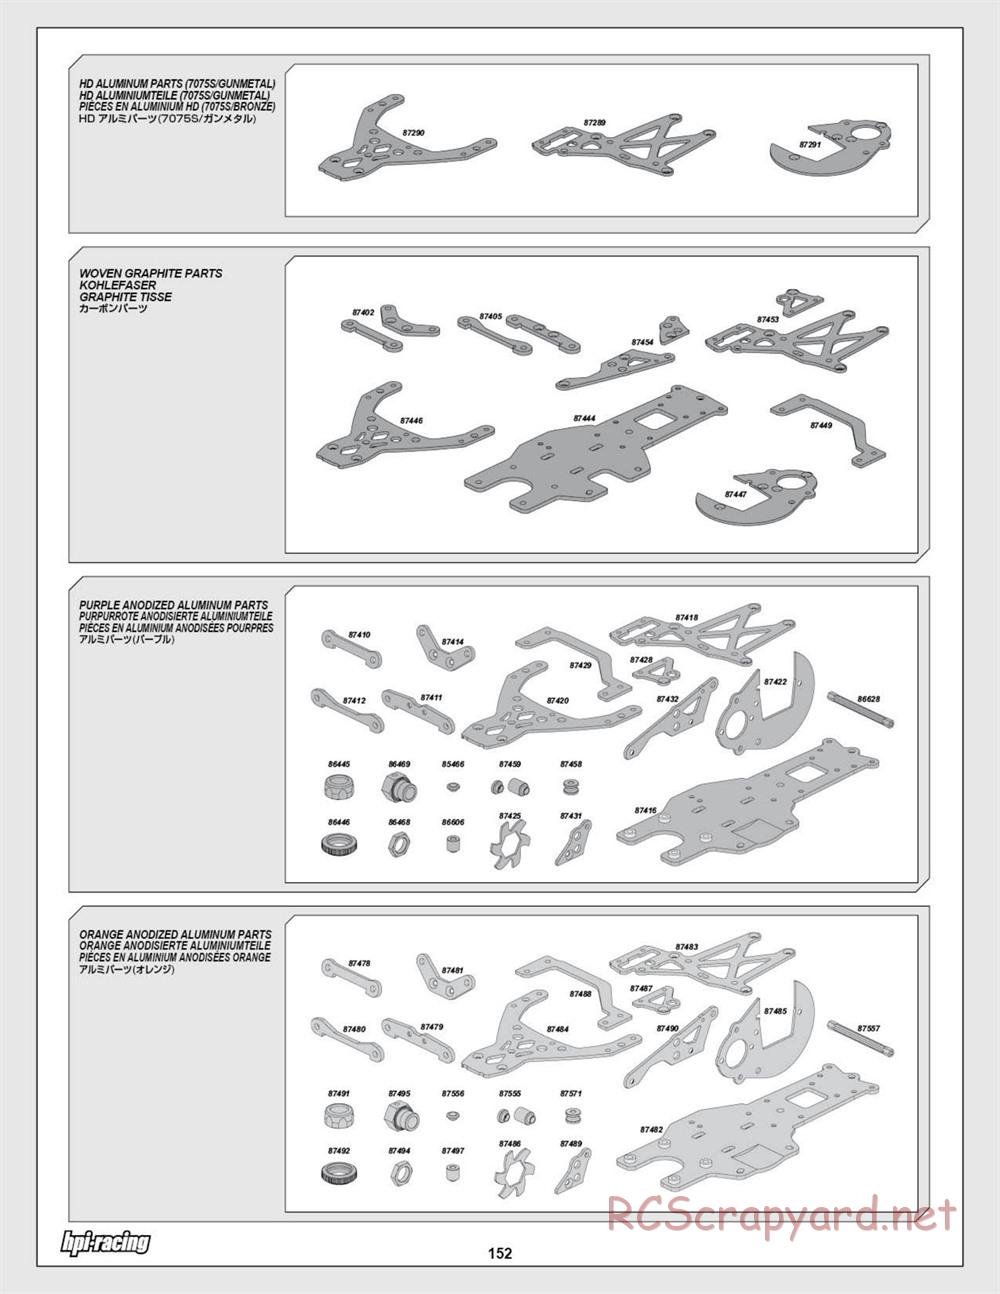 HPI - Baja 5SC SS - Exploded View - Page 152